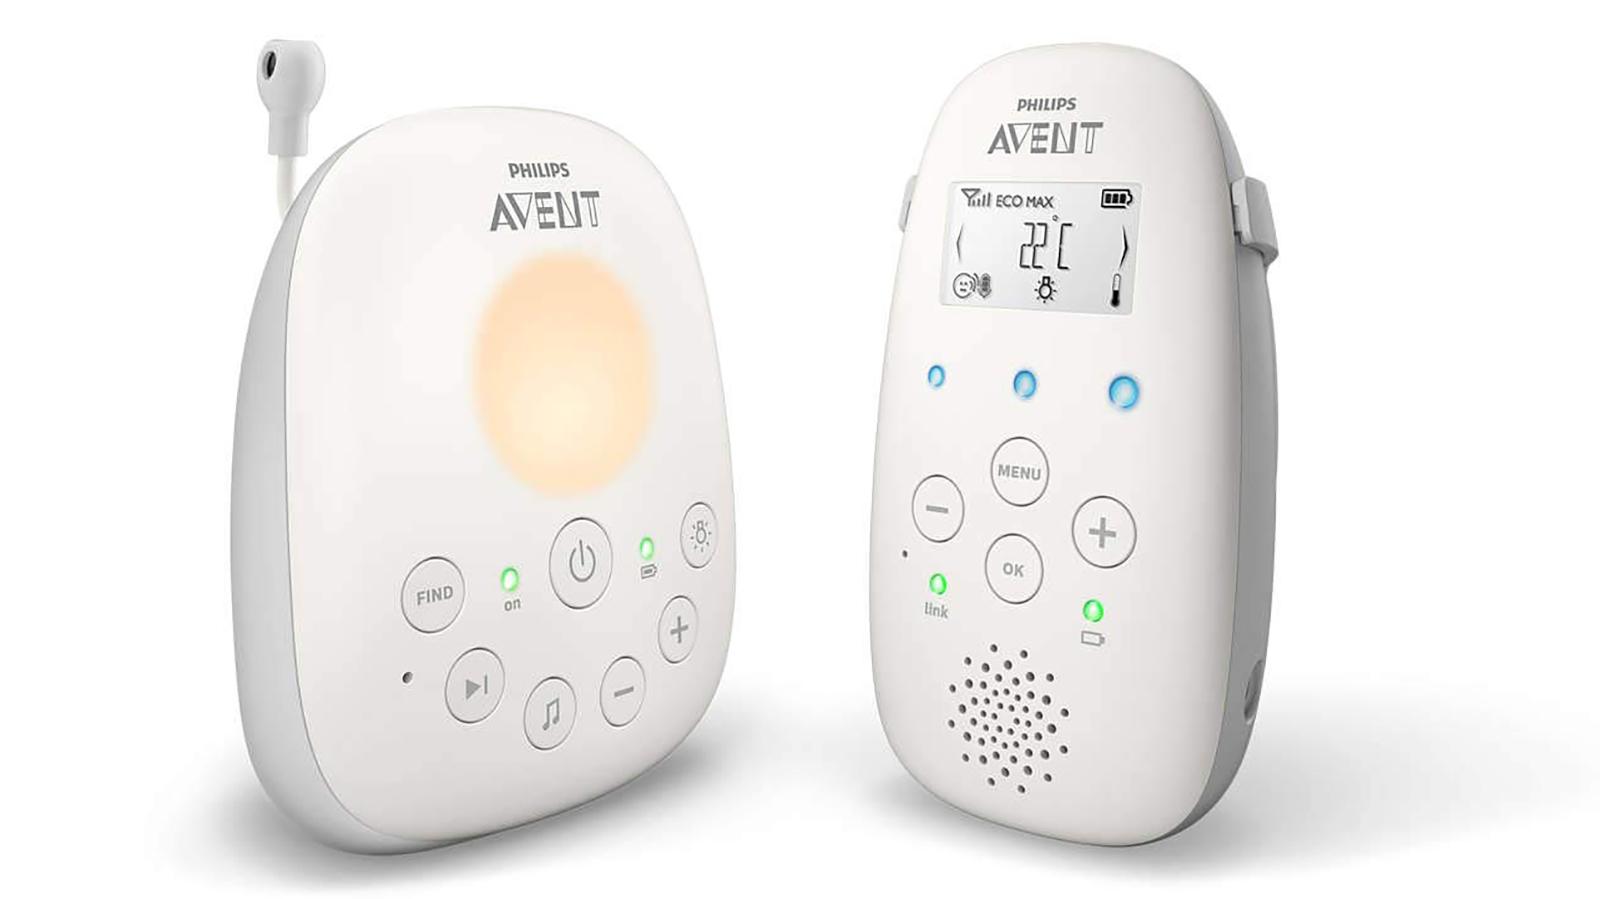  Philips Avent DECT baby monitor